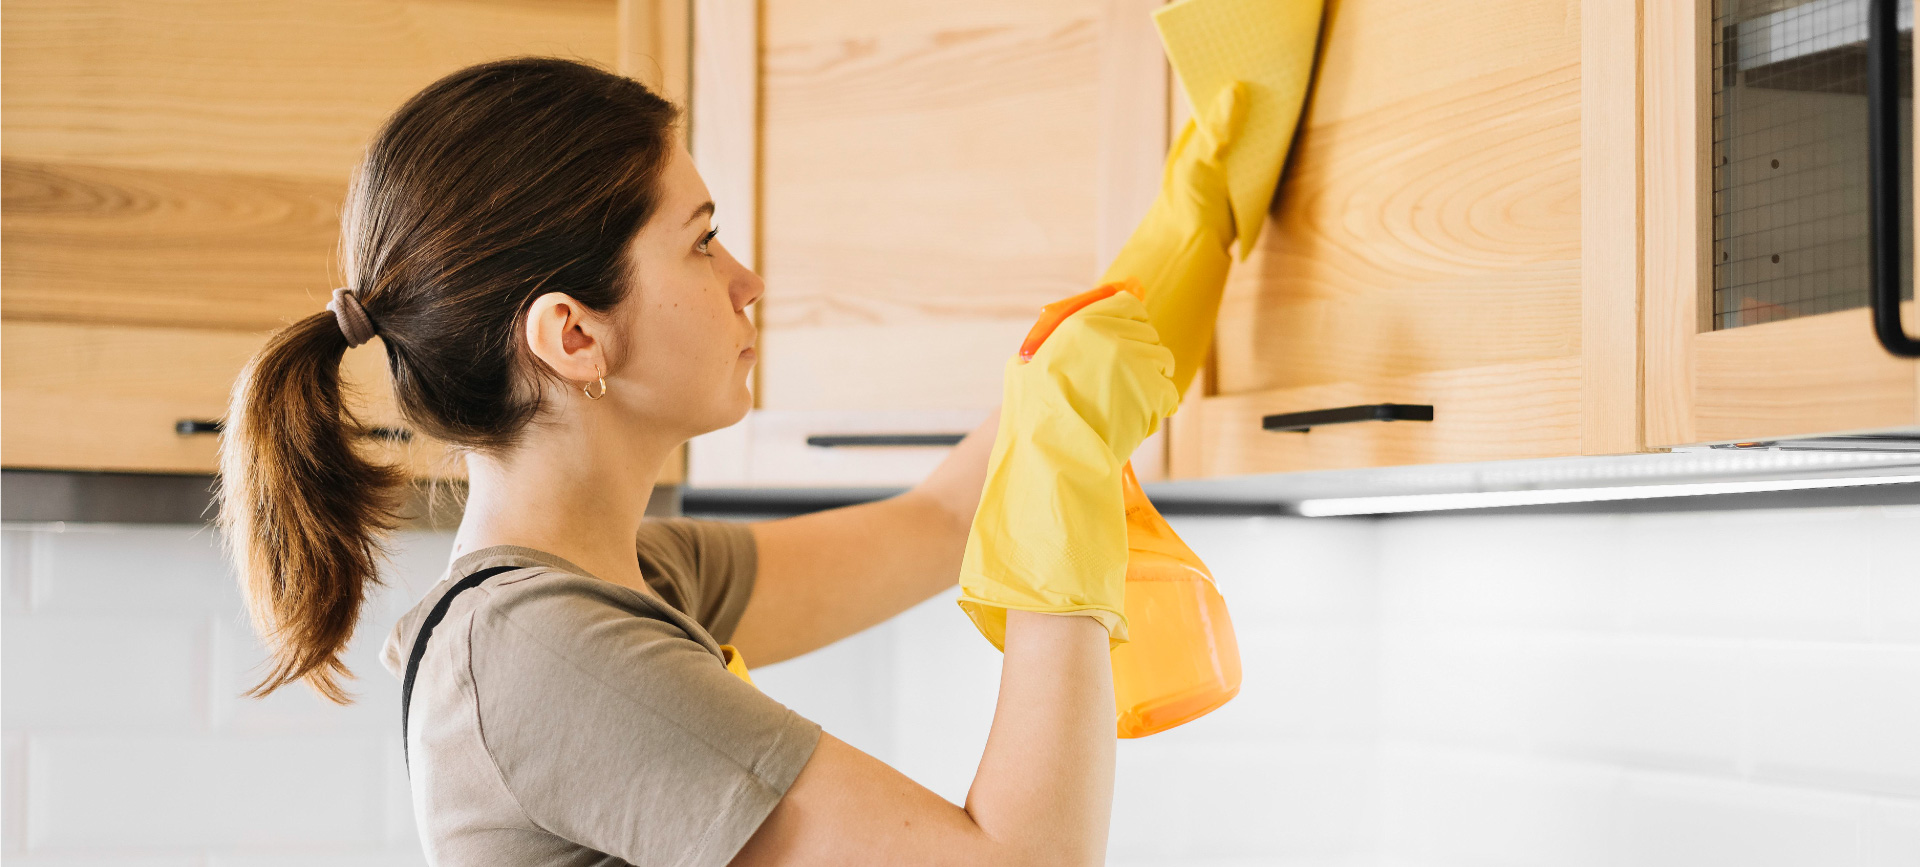 House Cleaning Myths You Need to Stop Believing